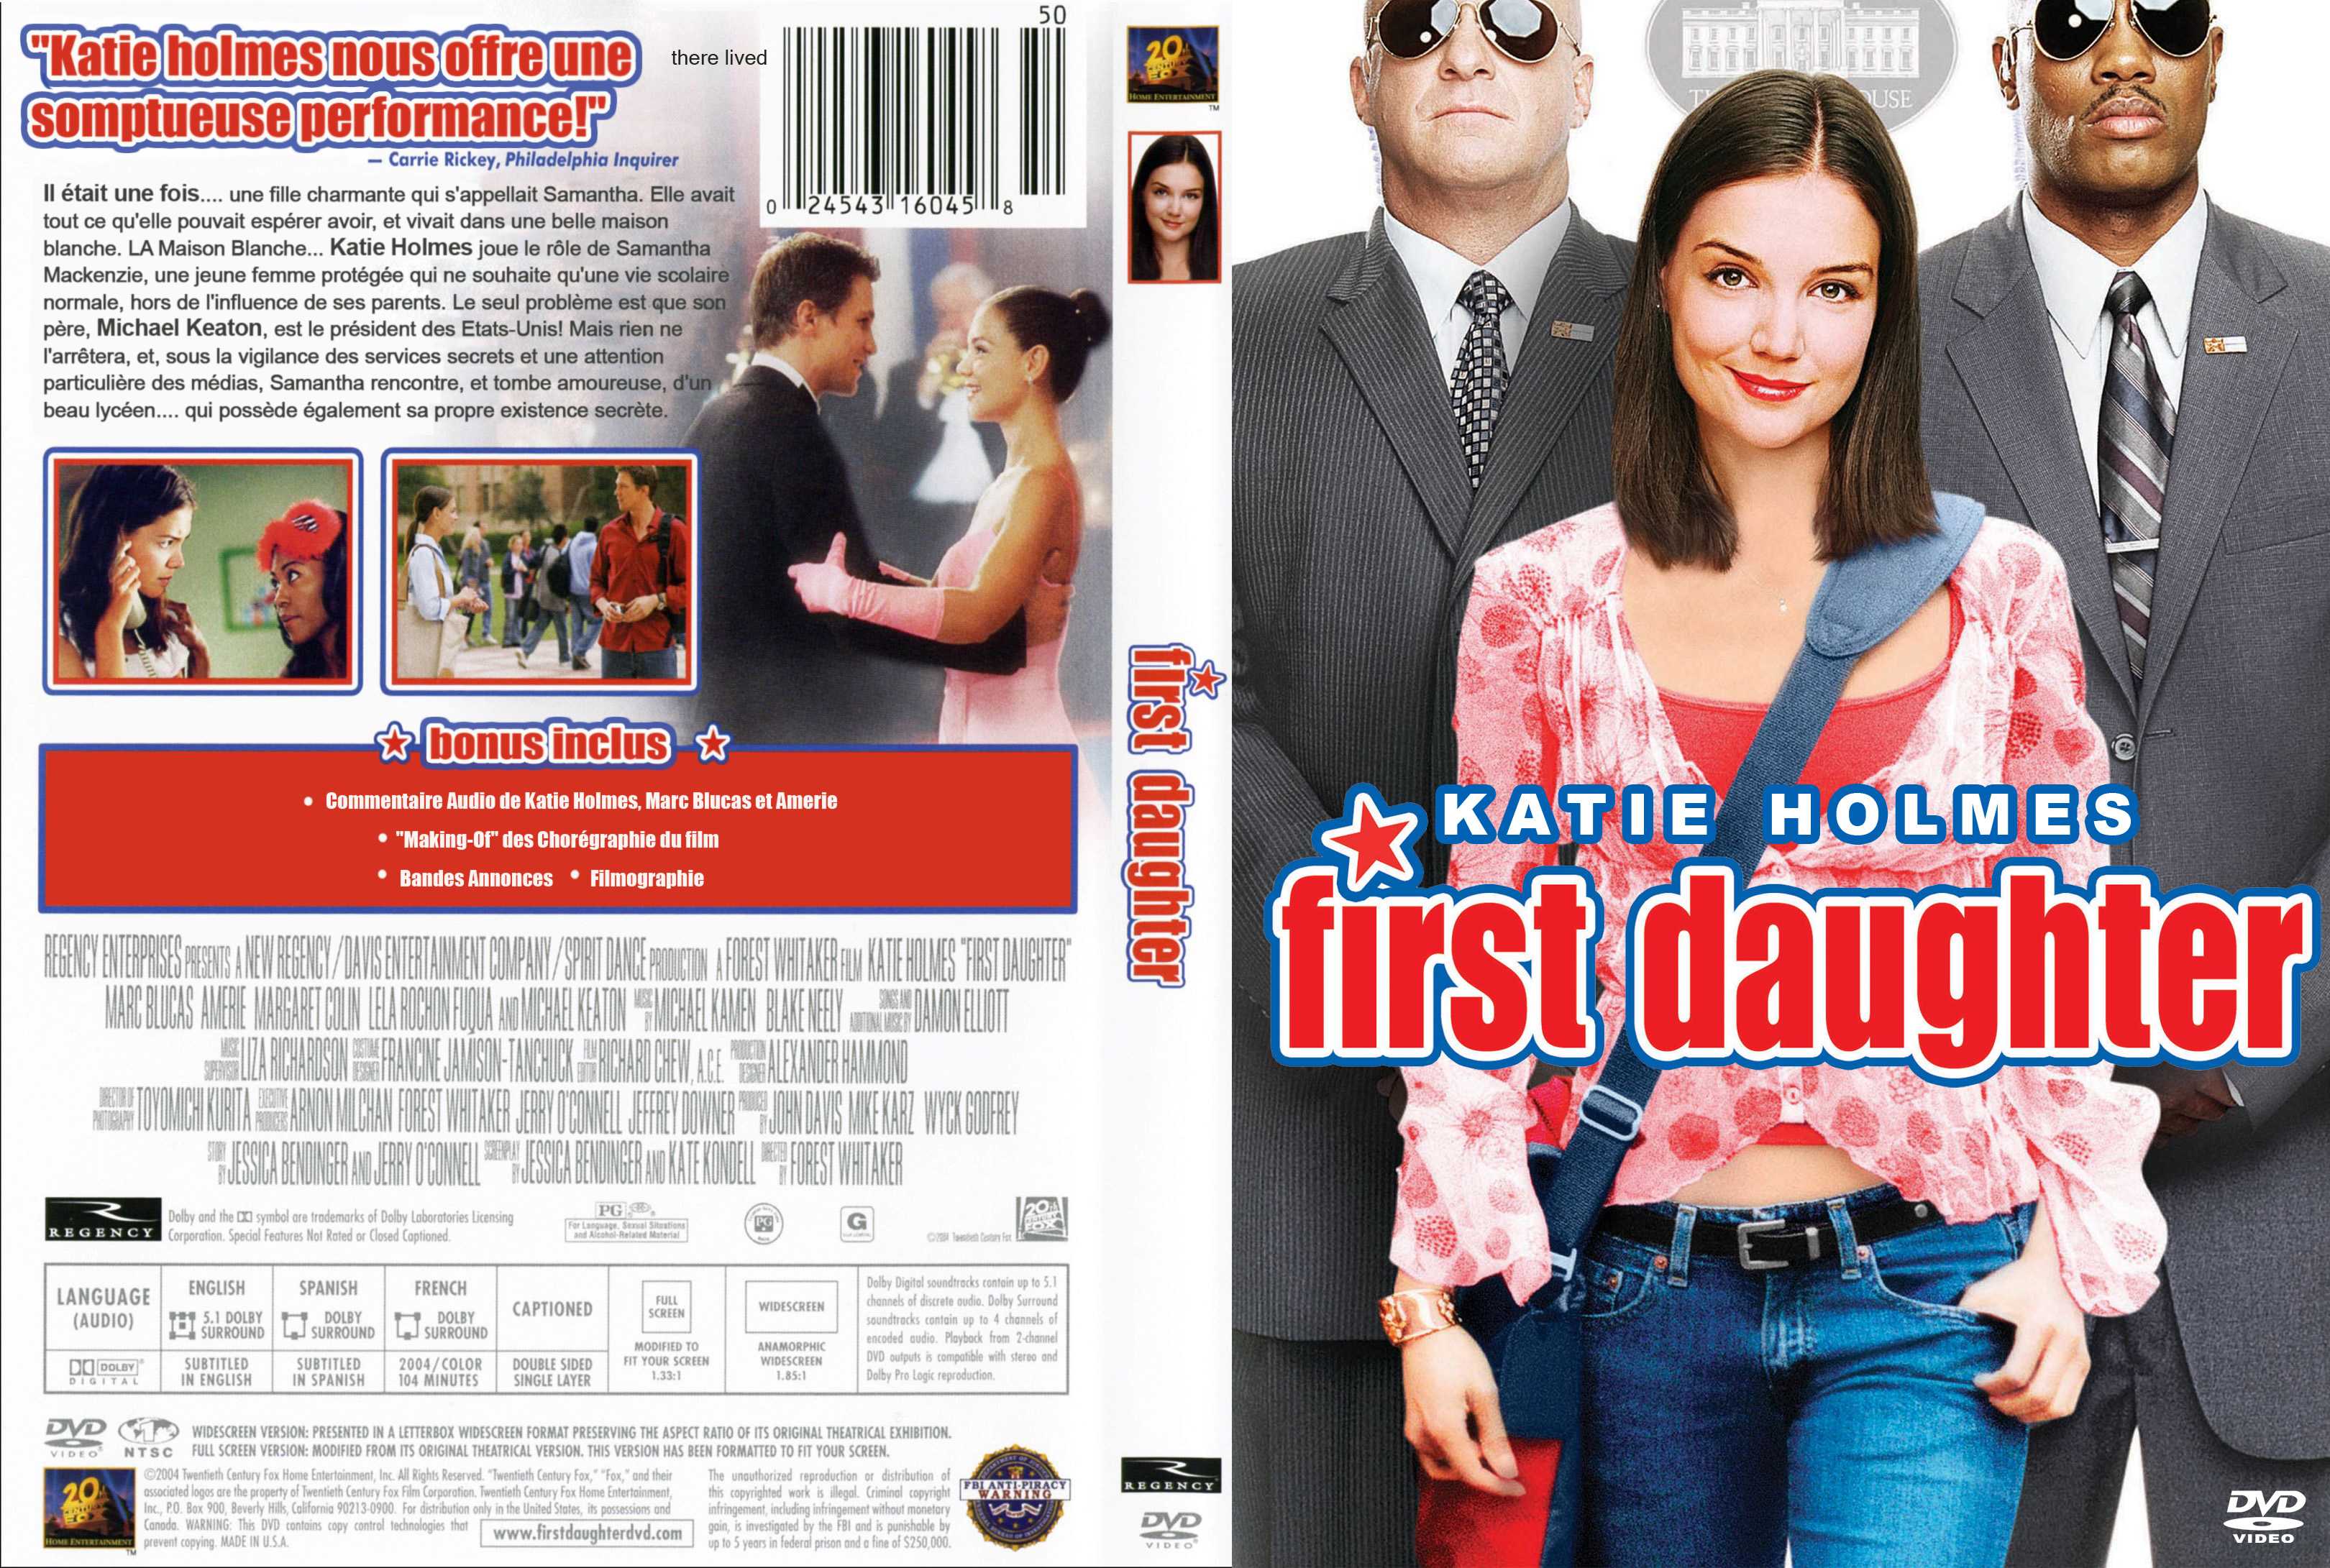 Jaquette DVD First daughter